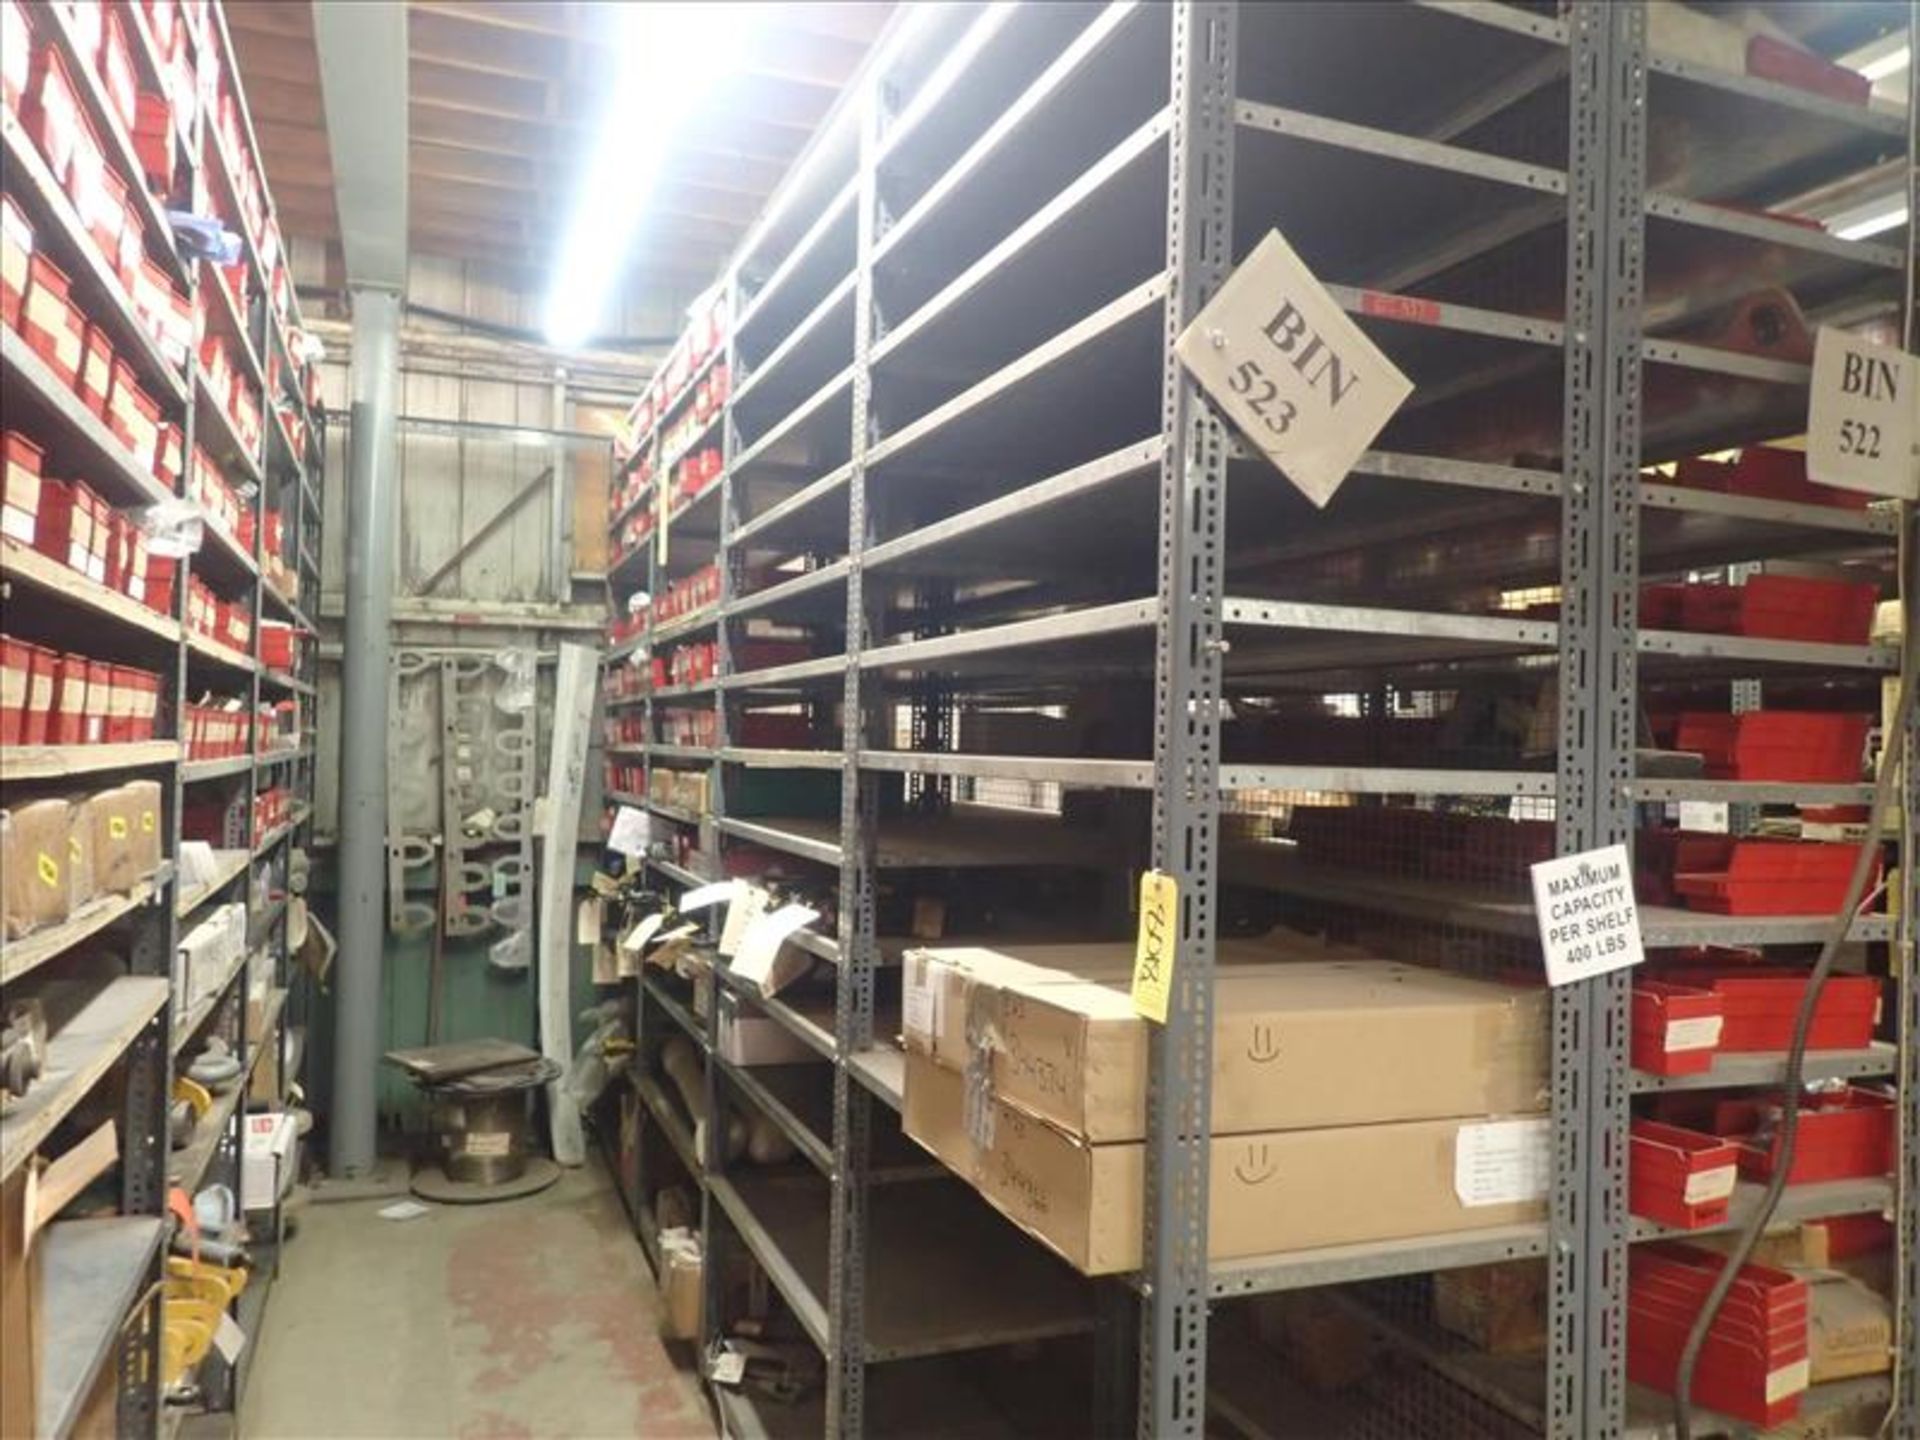 contents of shelving: cylinders, bushings, washers, spare parts, etc. (Bin 523)